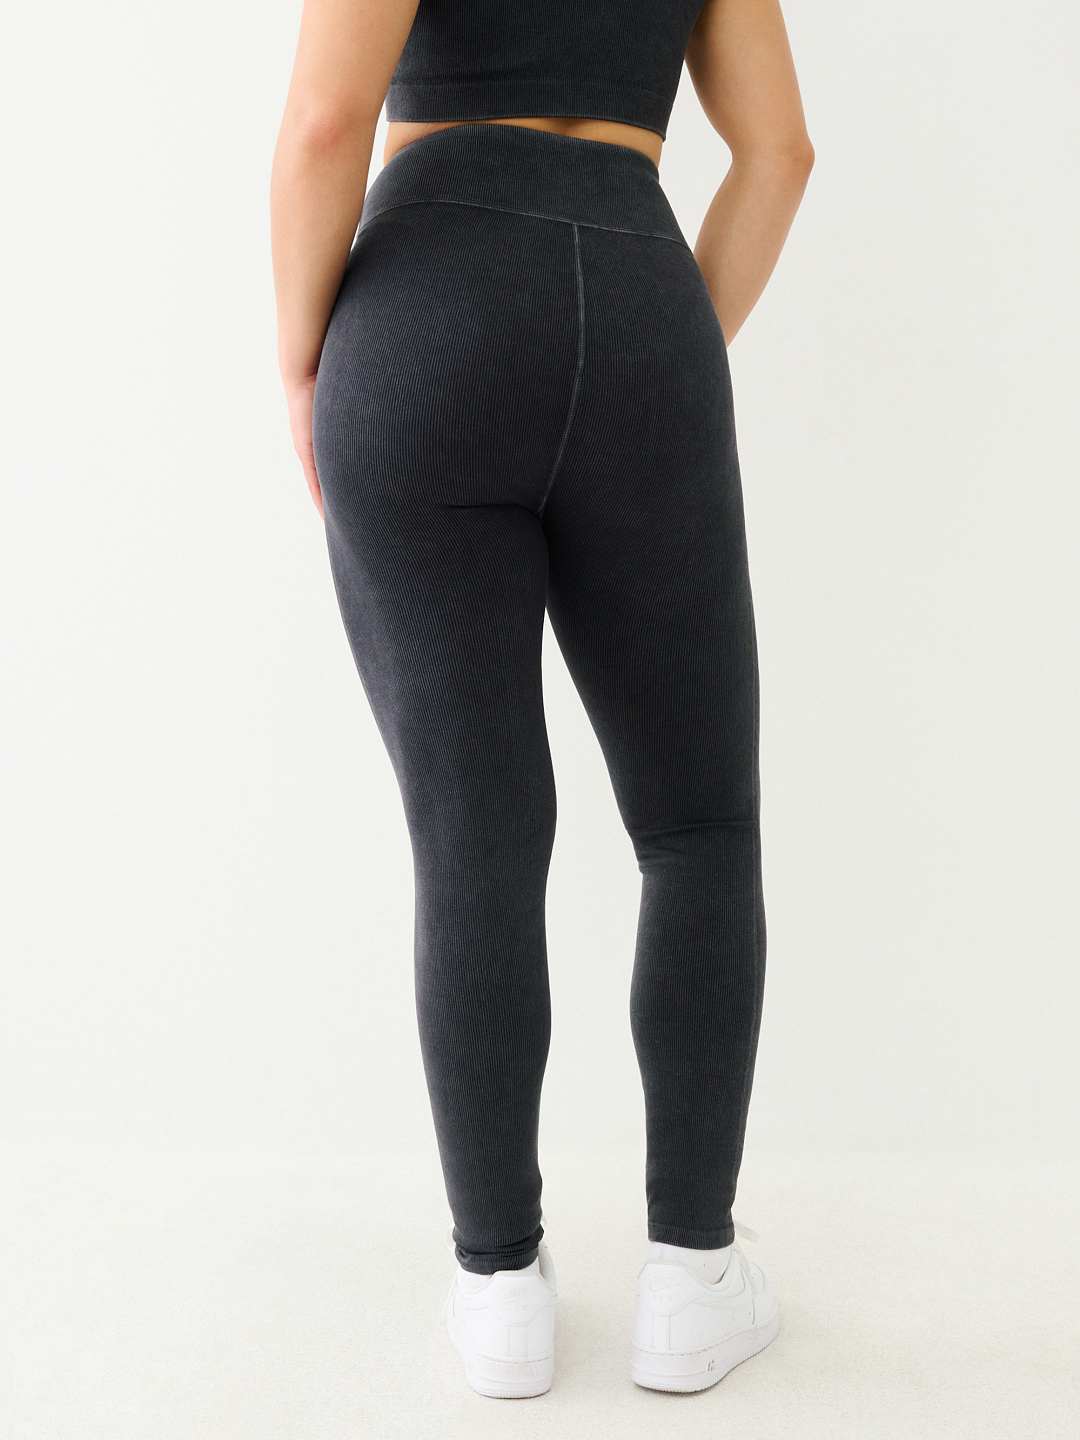 alphalete on X: Our new charcoal Revival Leggings drop this